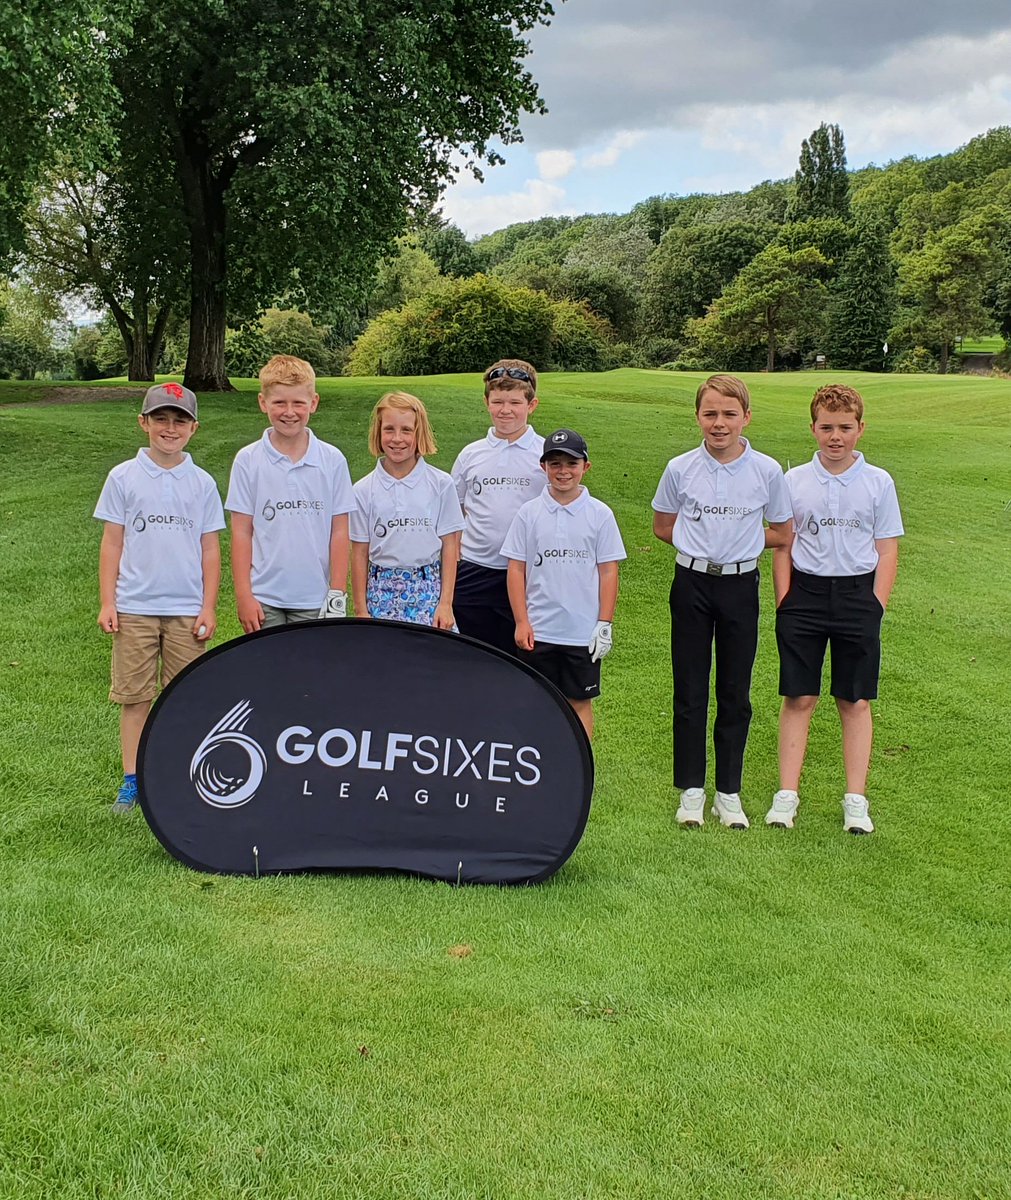 Golfsixes team prepped and ready to go for Round 2 of the @wales_golf South East League @llanwerngolf